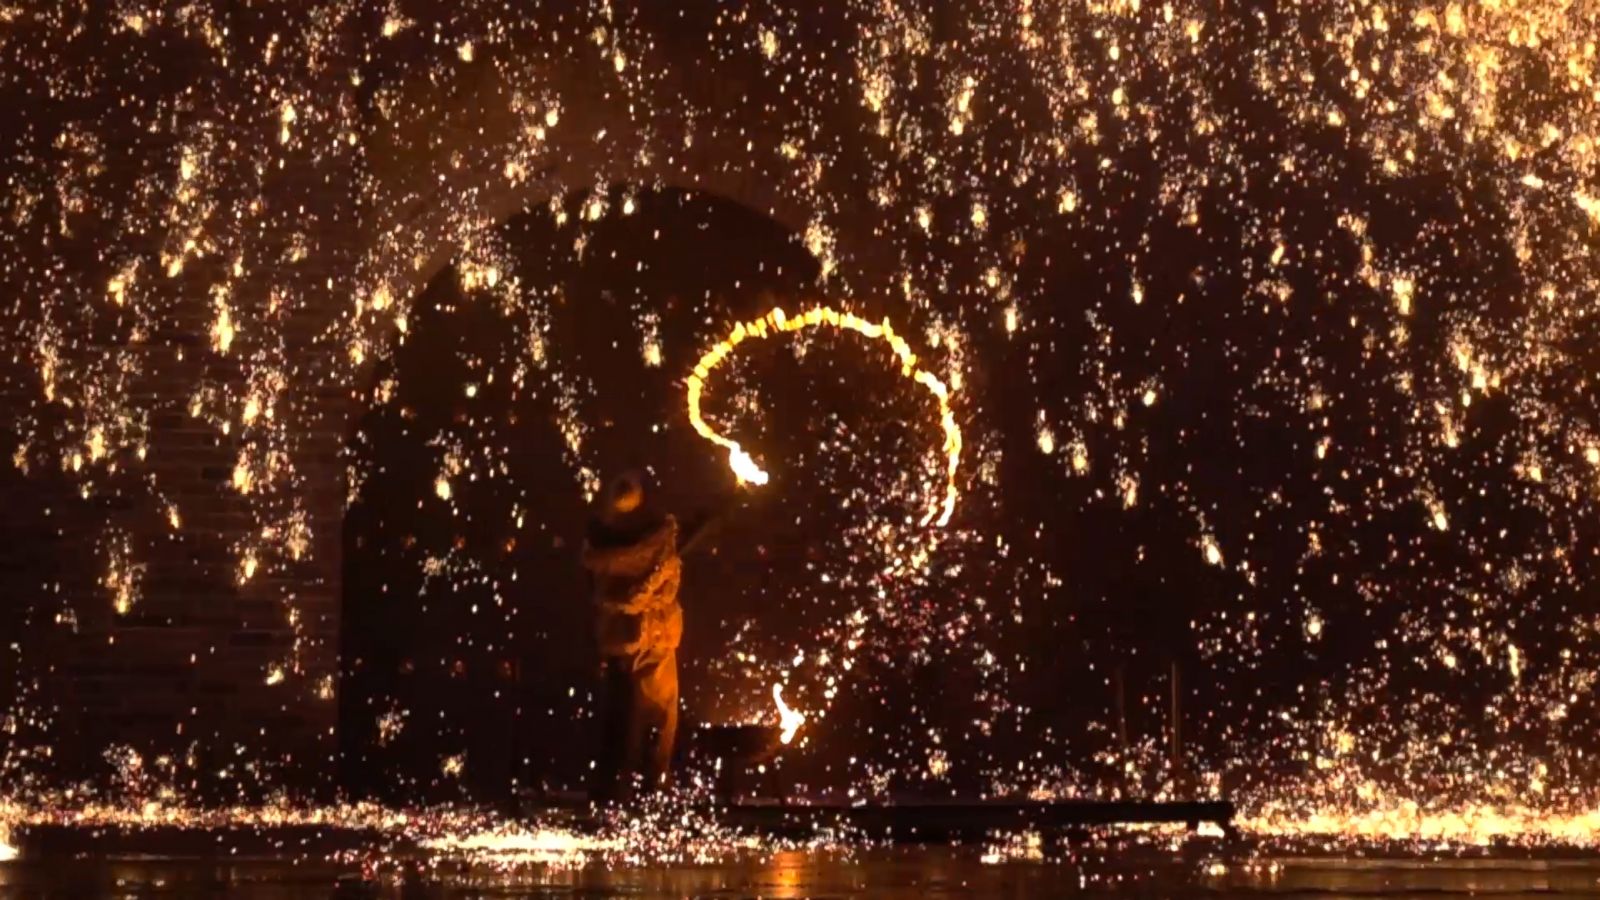 Chinese New Year Fireworks So Dangerous That Only a Few Get to Witness -  ABC News